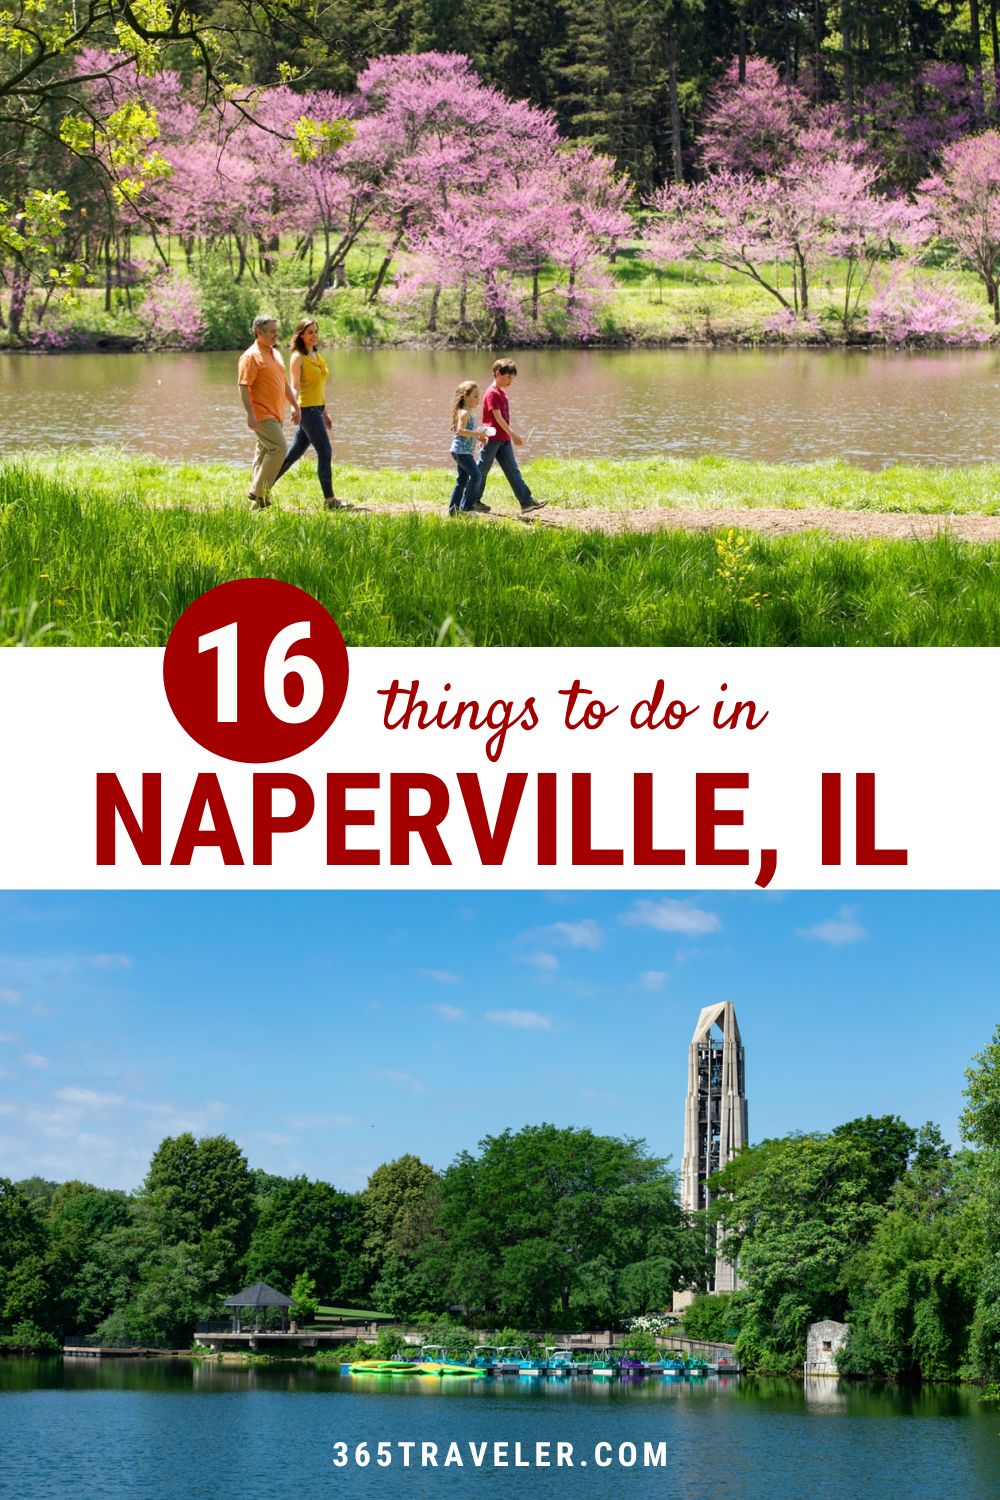 16 Fun Things To Do in Naperville, IL You’ll Love